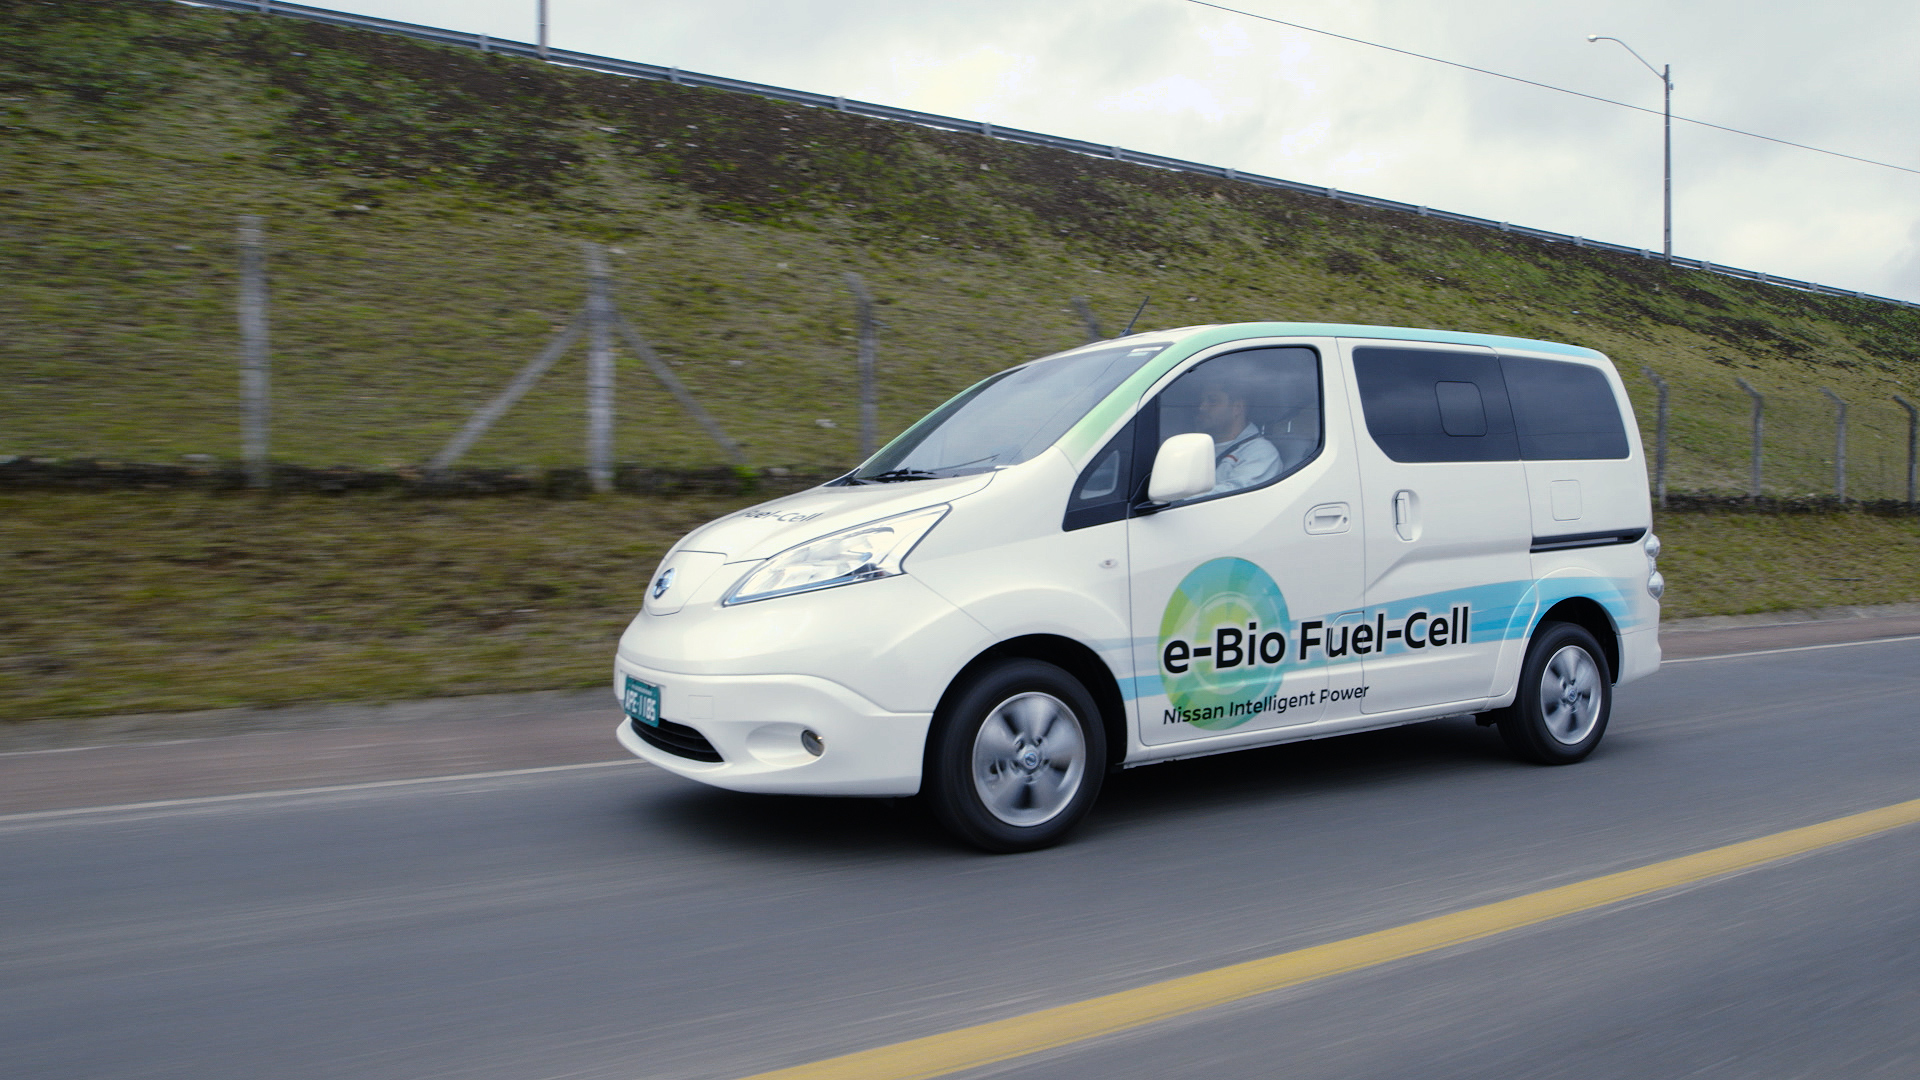 YOKOHAMA, Japan (August 4, 2016)  In Brazil today, Nissan Motor Co., Ltd. today revealed the worlds first Solid Oxide Fuel-Cell (SOFC)-powered prototype vehicle that runs on bio-ethanol electric power. The breakthrough model is an all-new lightcommercial vehicle that can rely on multiple fuels  including ethanol and natural gas  to produce high-efficiency electricity as a power source.